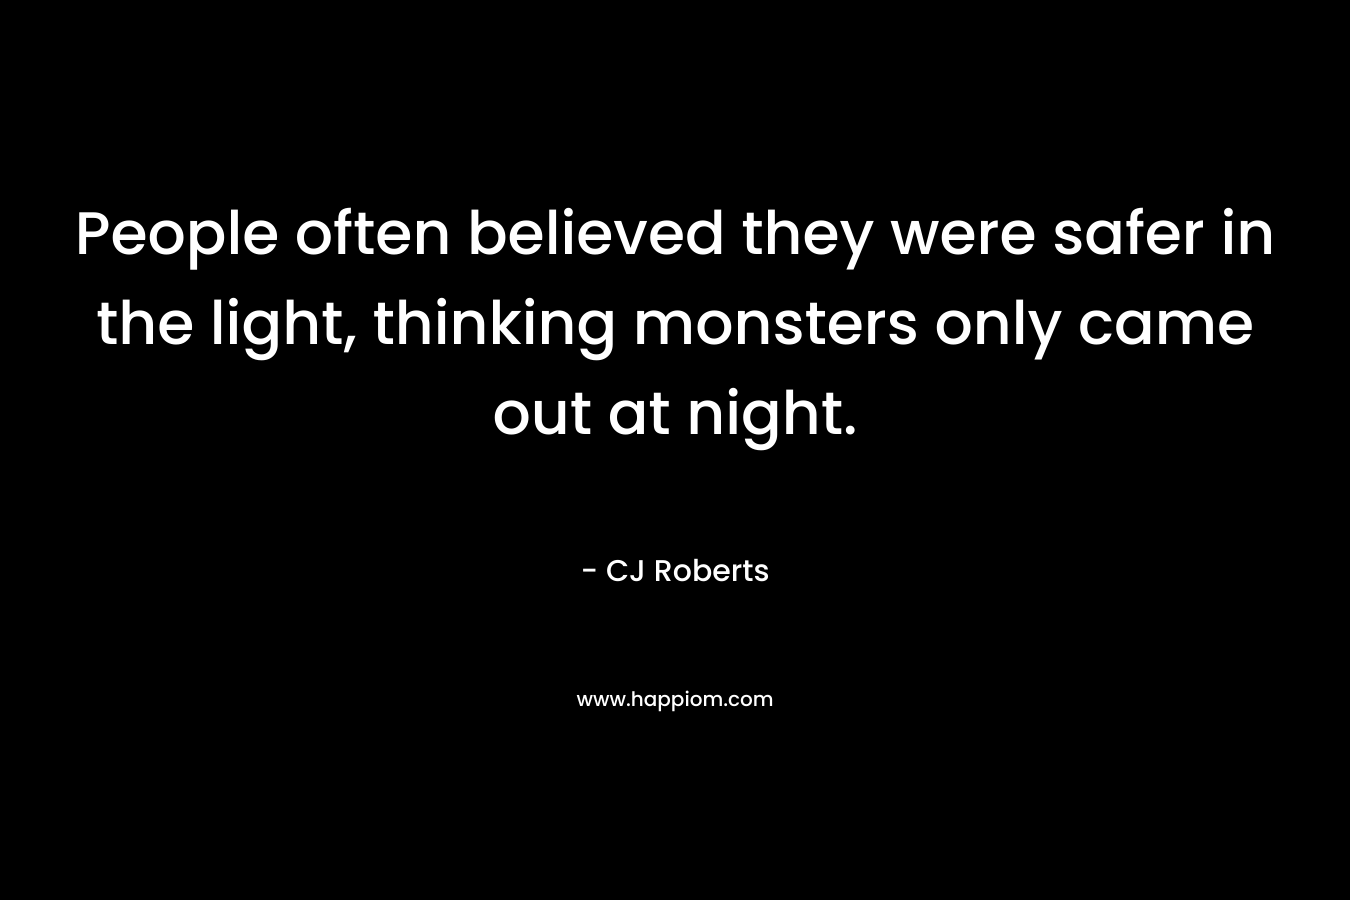 People often believed they were safer in the light, thinking monsters only came out at night.